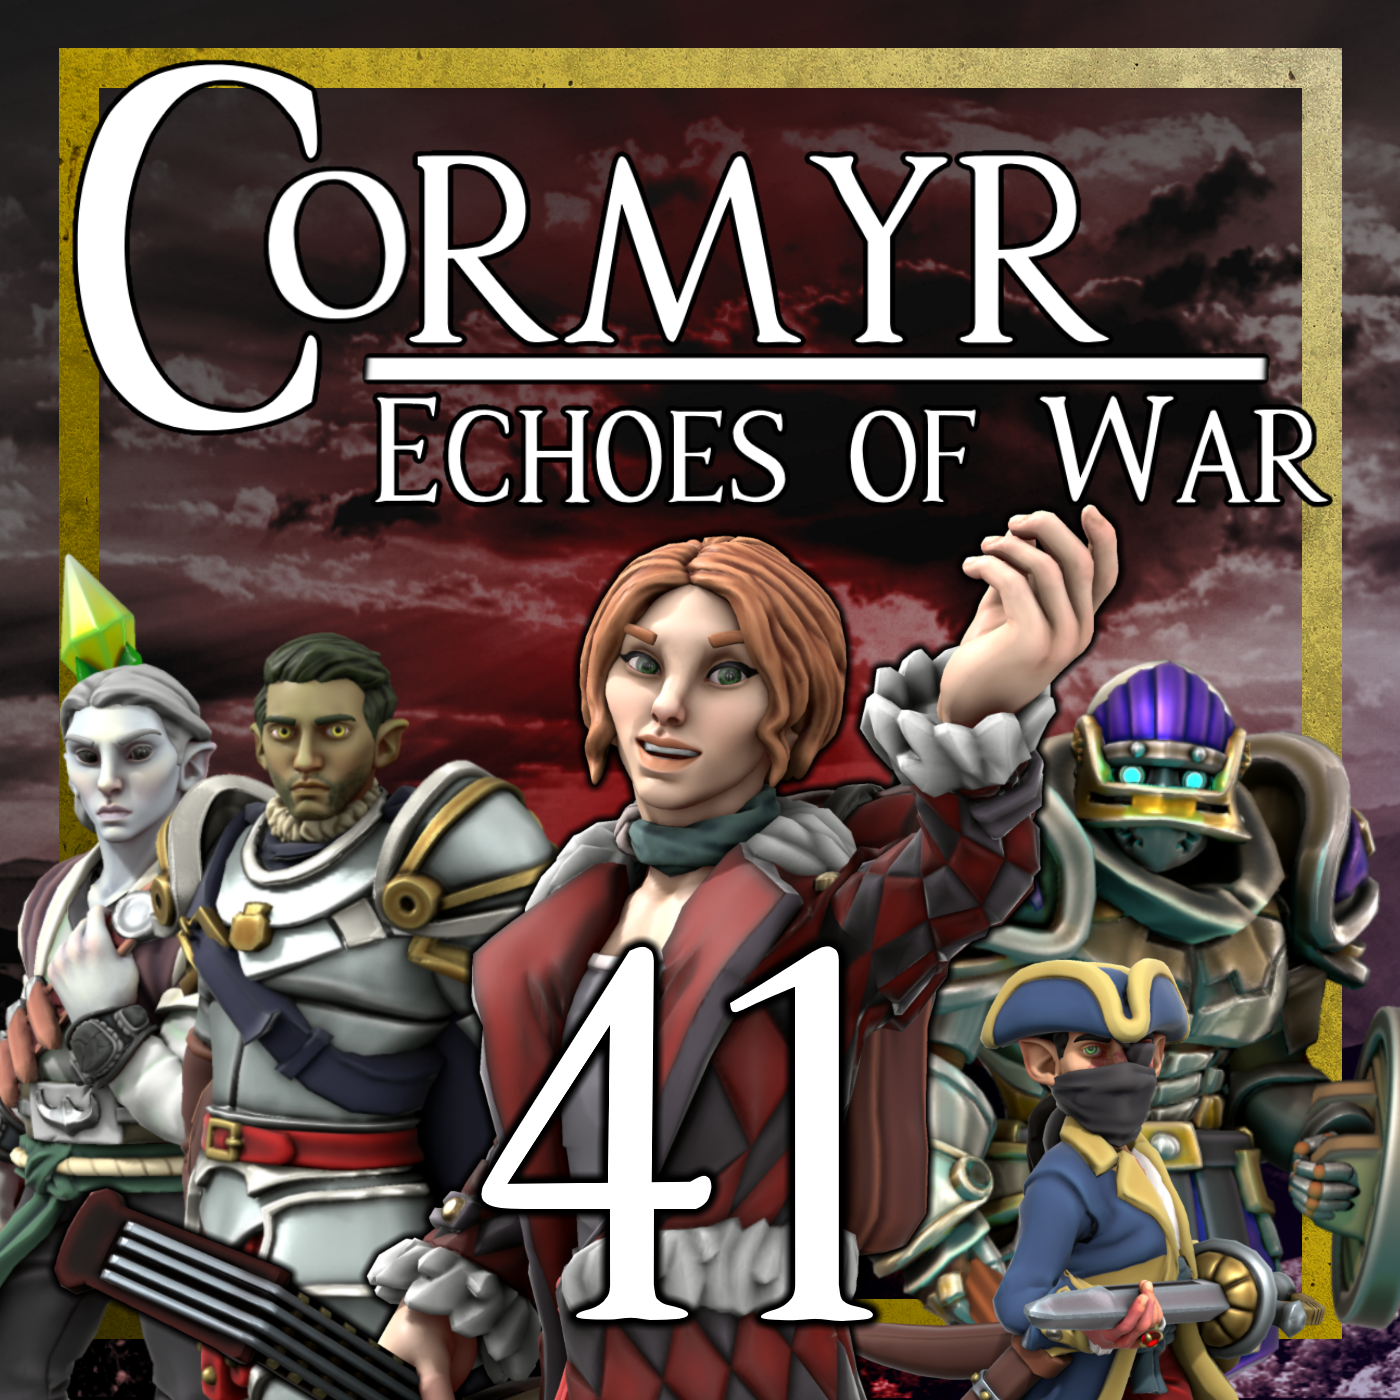 Cormyr: Echoes of War - Ep. 41 - The Memories We Made